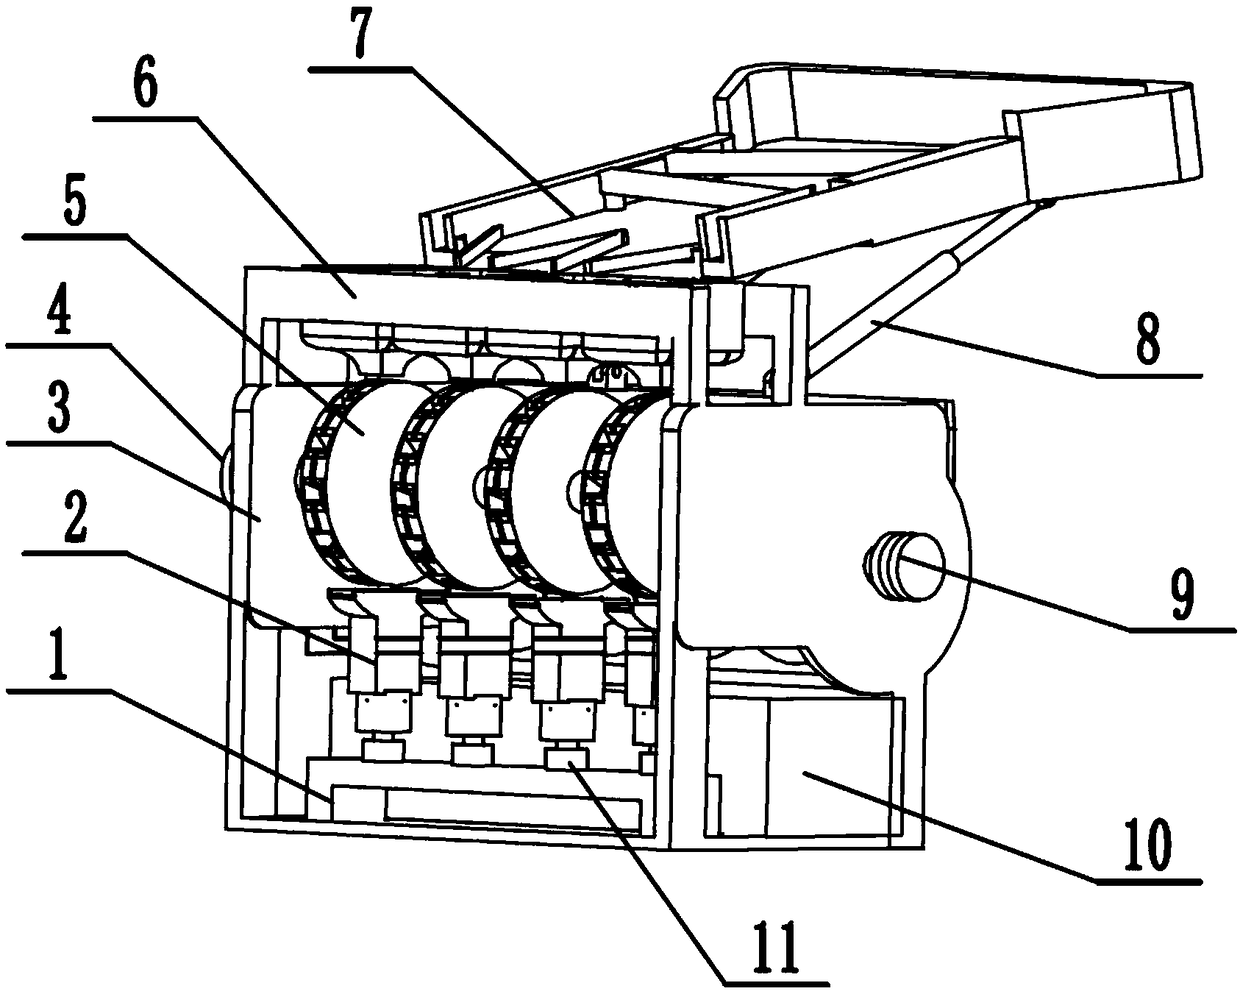 Opening device capable of automatically separating large macadamia nuts from small macadamia nuts